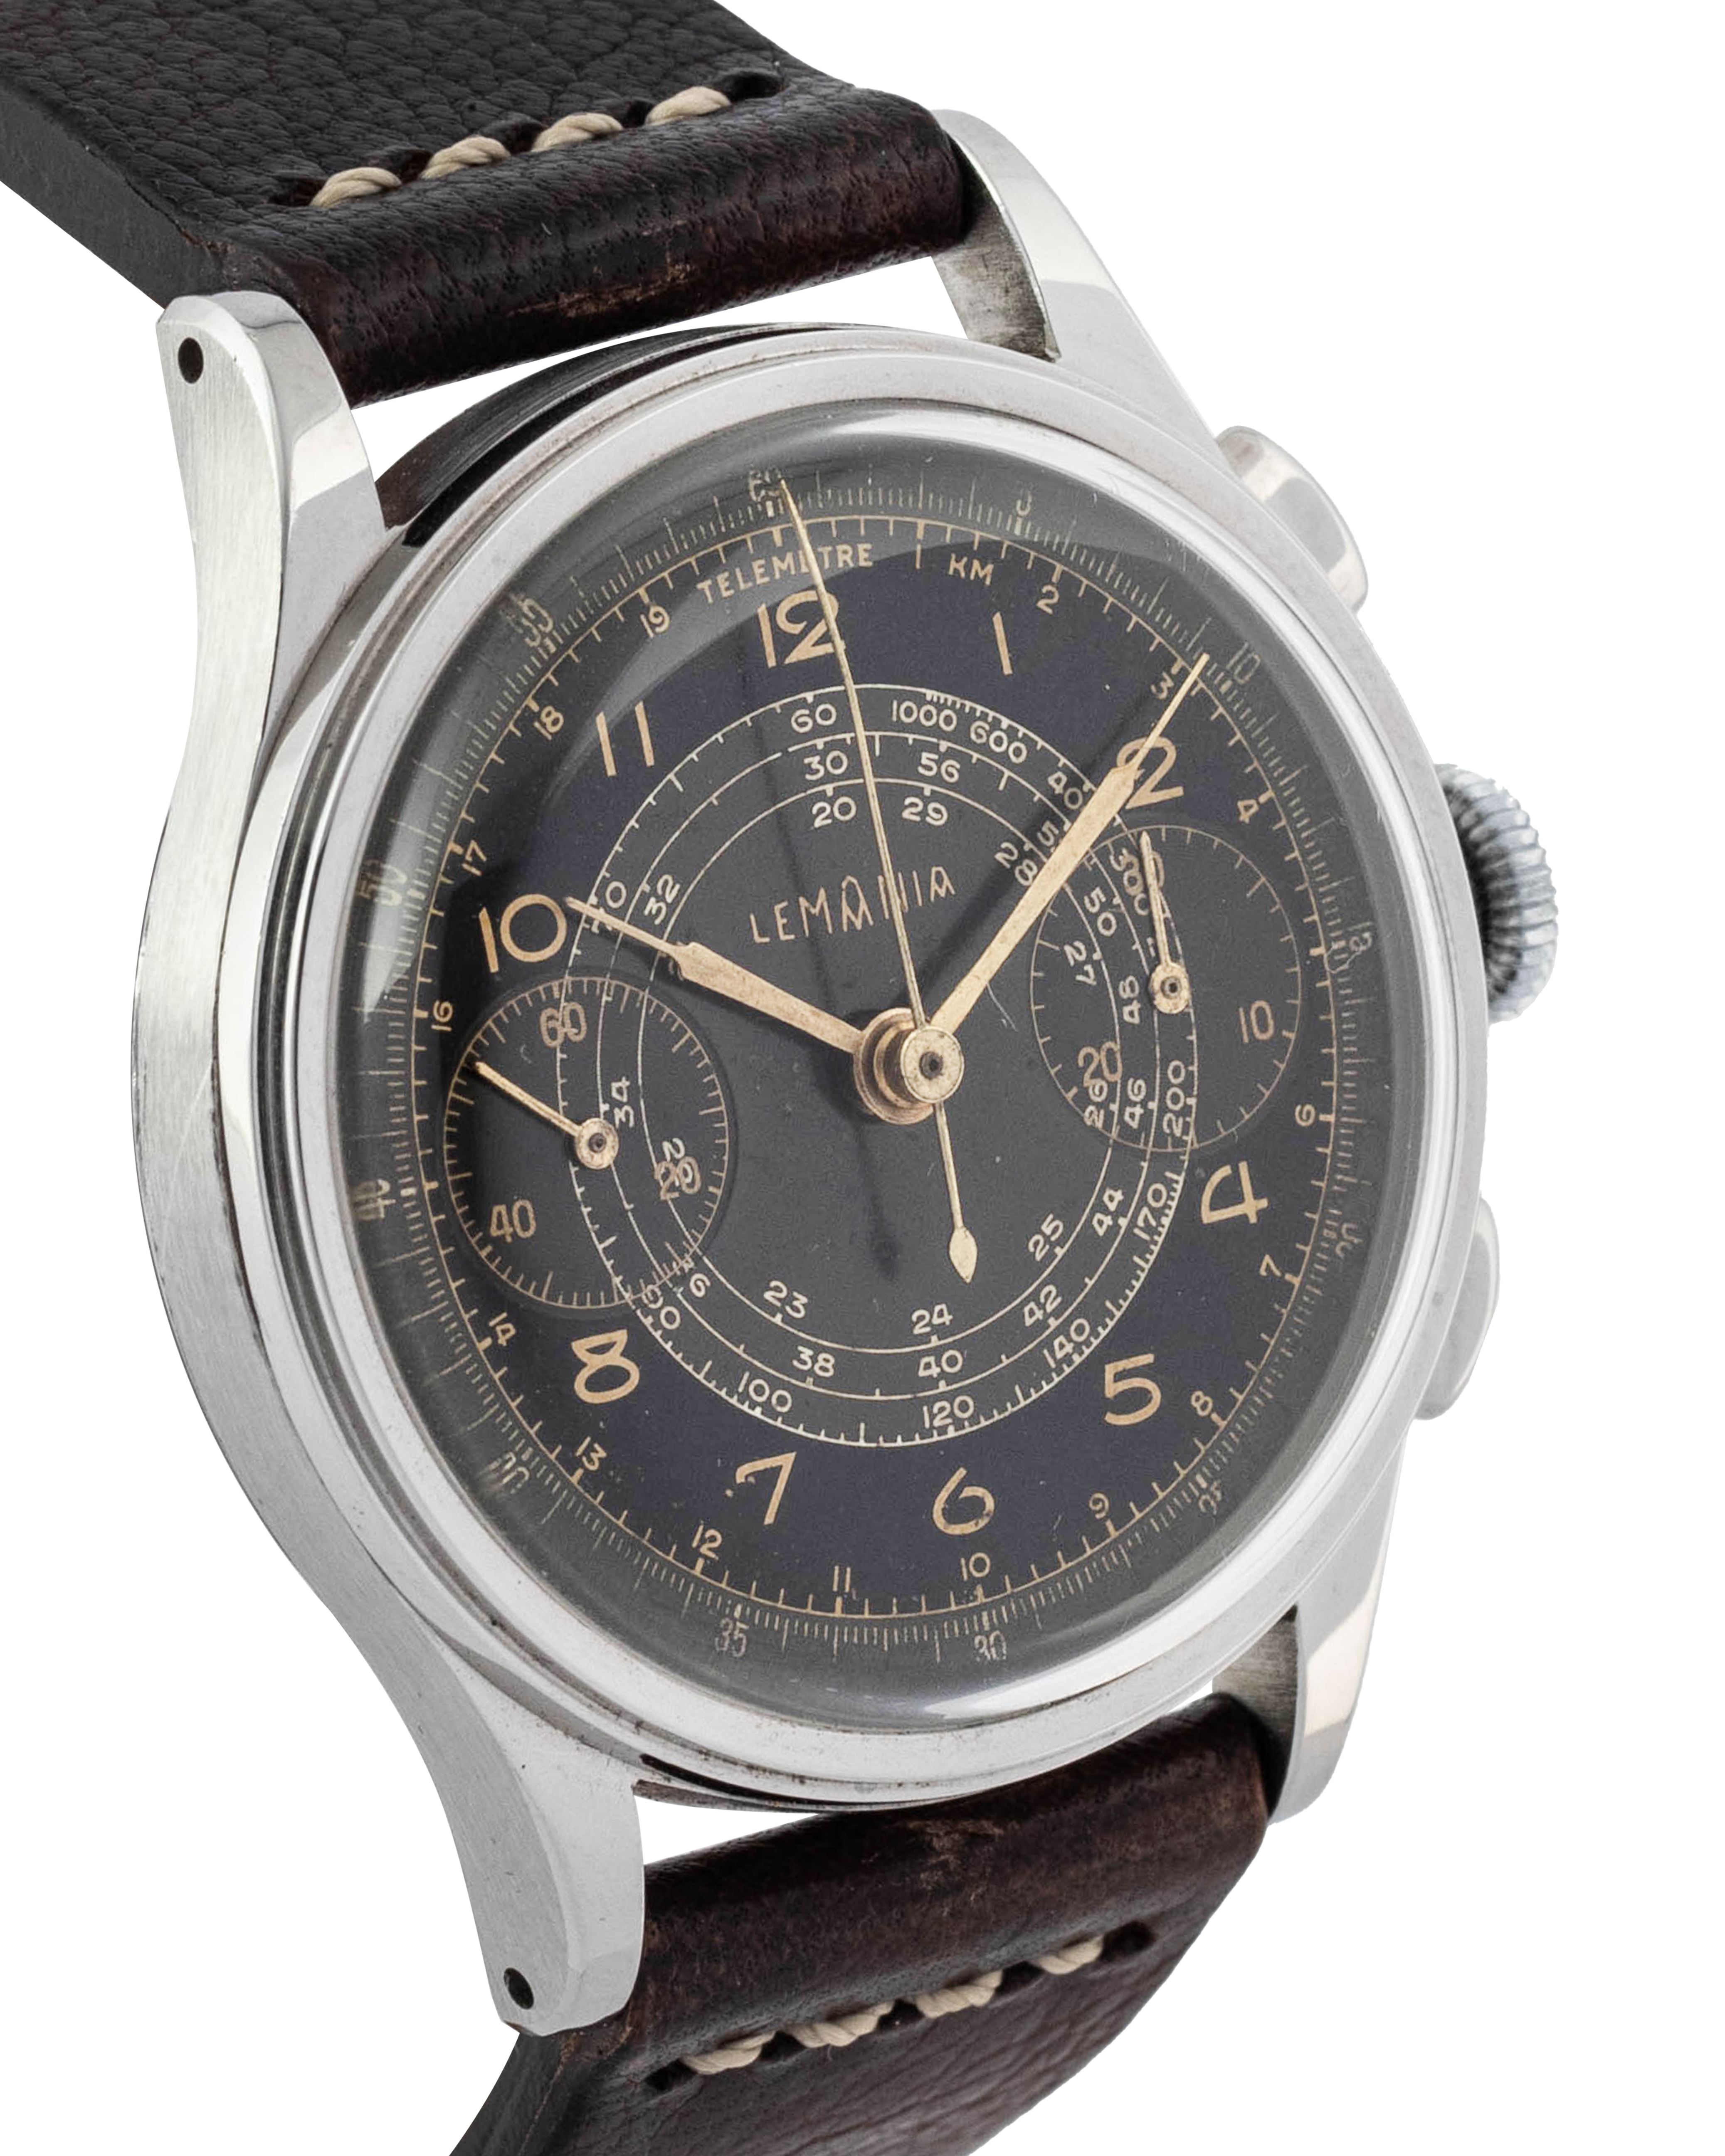 Lemania Chronograph wrist watch Black & Grey with stainless steel case